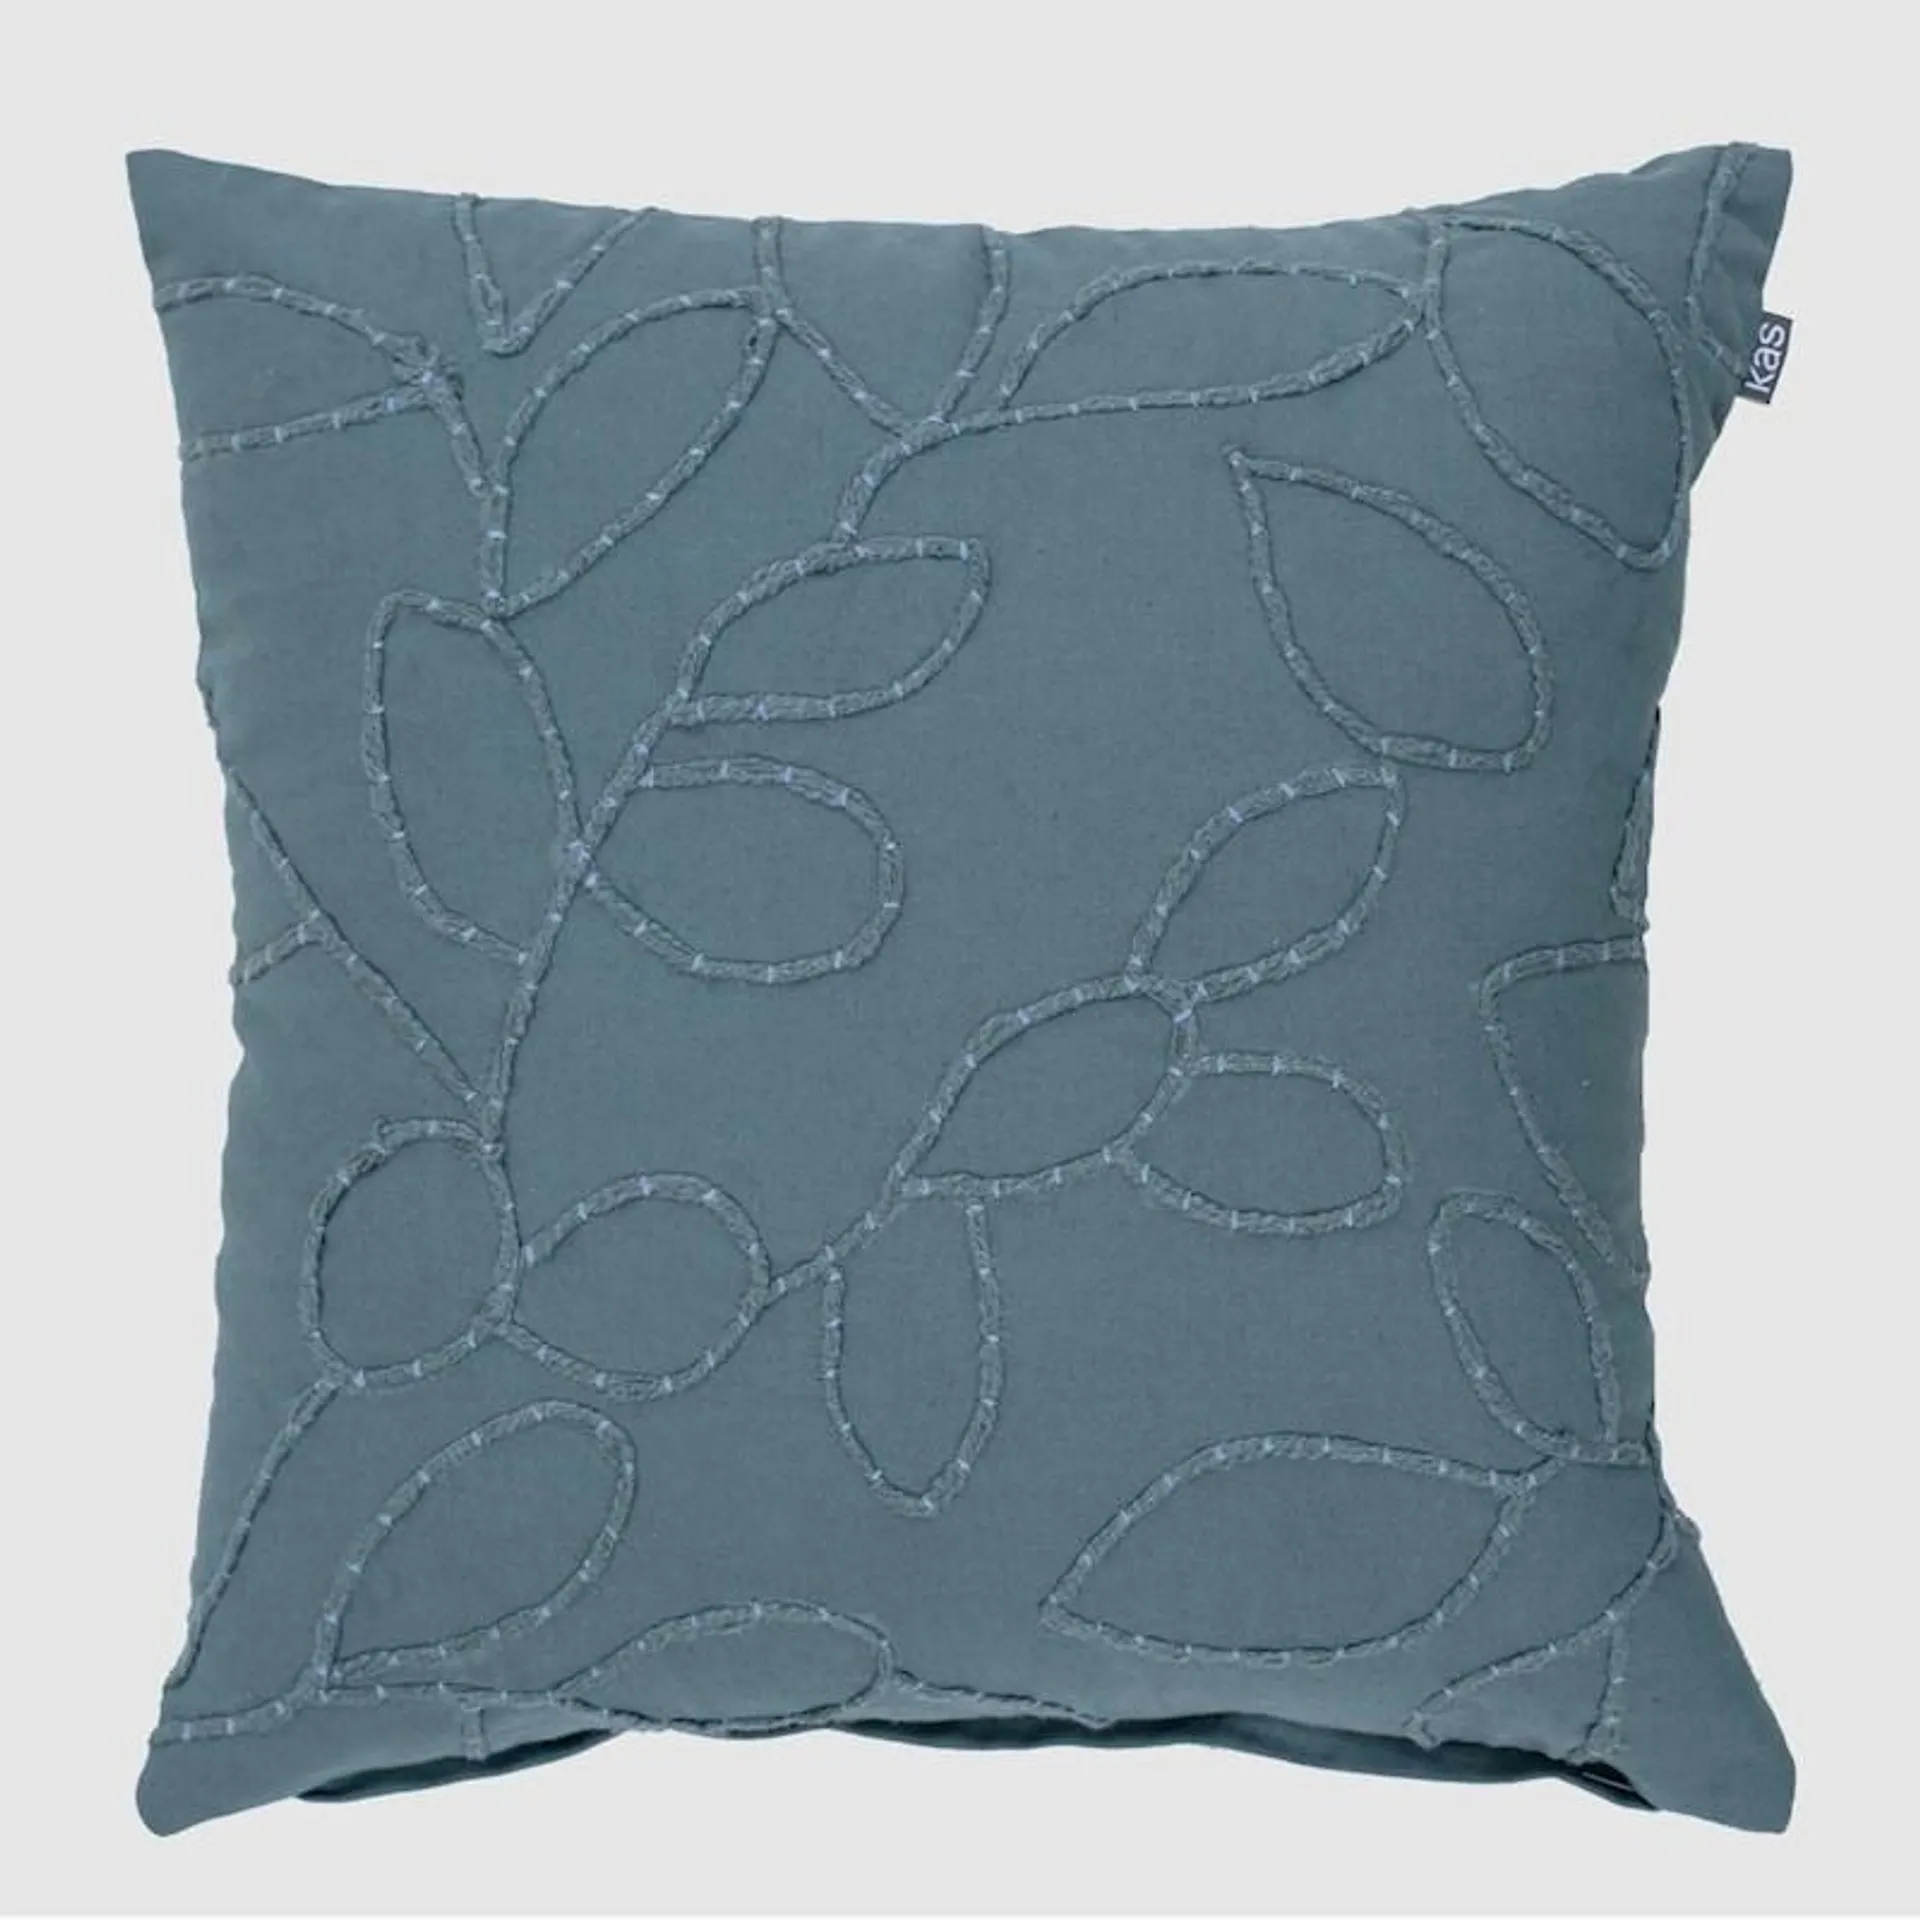 KAS Hampstead Cotton Embroidered Cushion 45x45cm